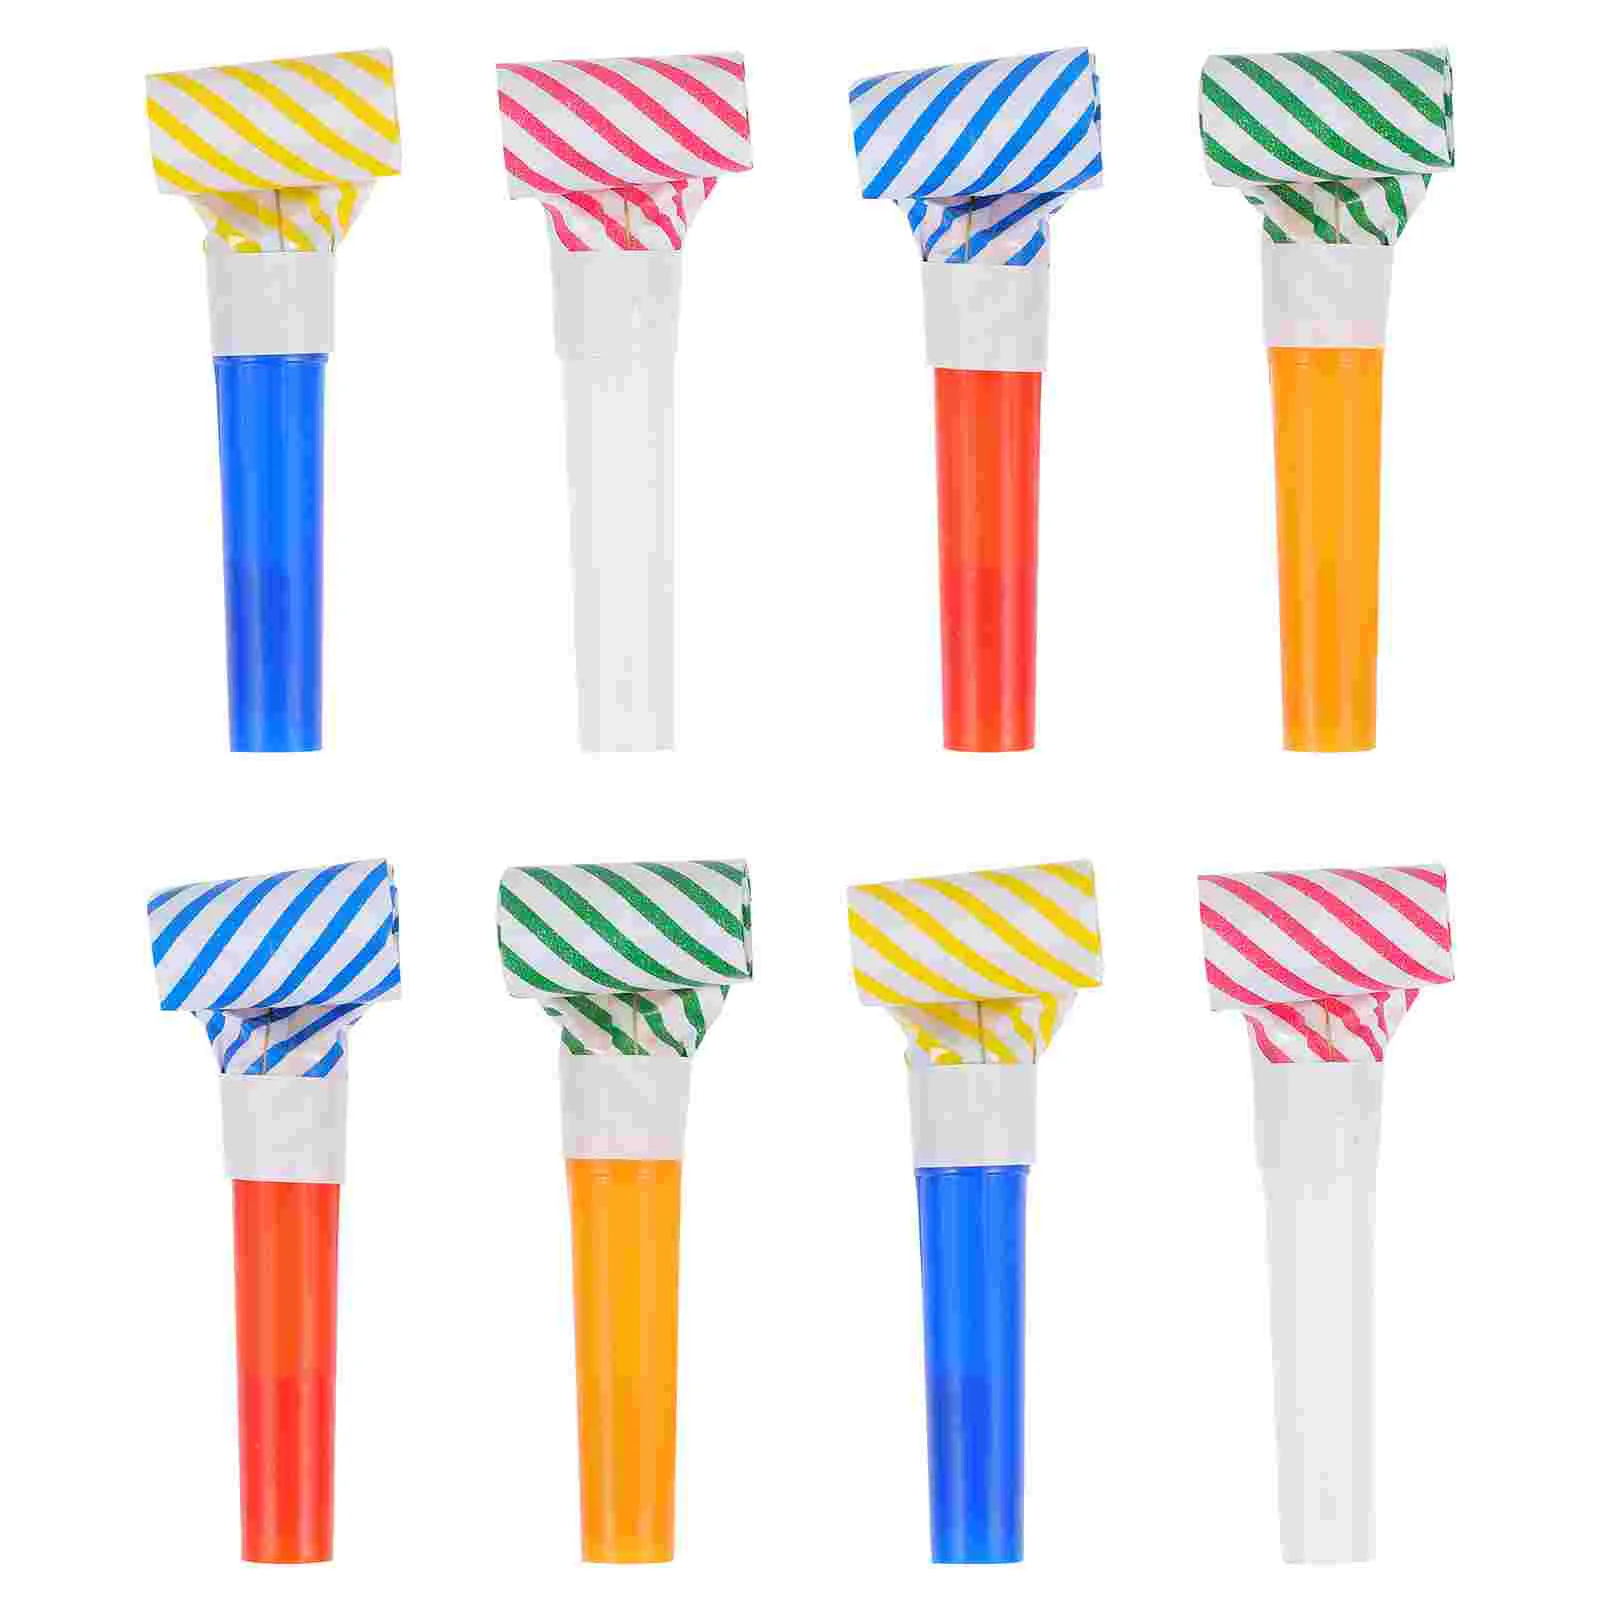 

Party Noisemakers Whistles Birthday Blowers Blowouts Blower Horns Musical Kids Whistle Blowout Noise Favors Sporting Events Toys